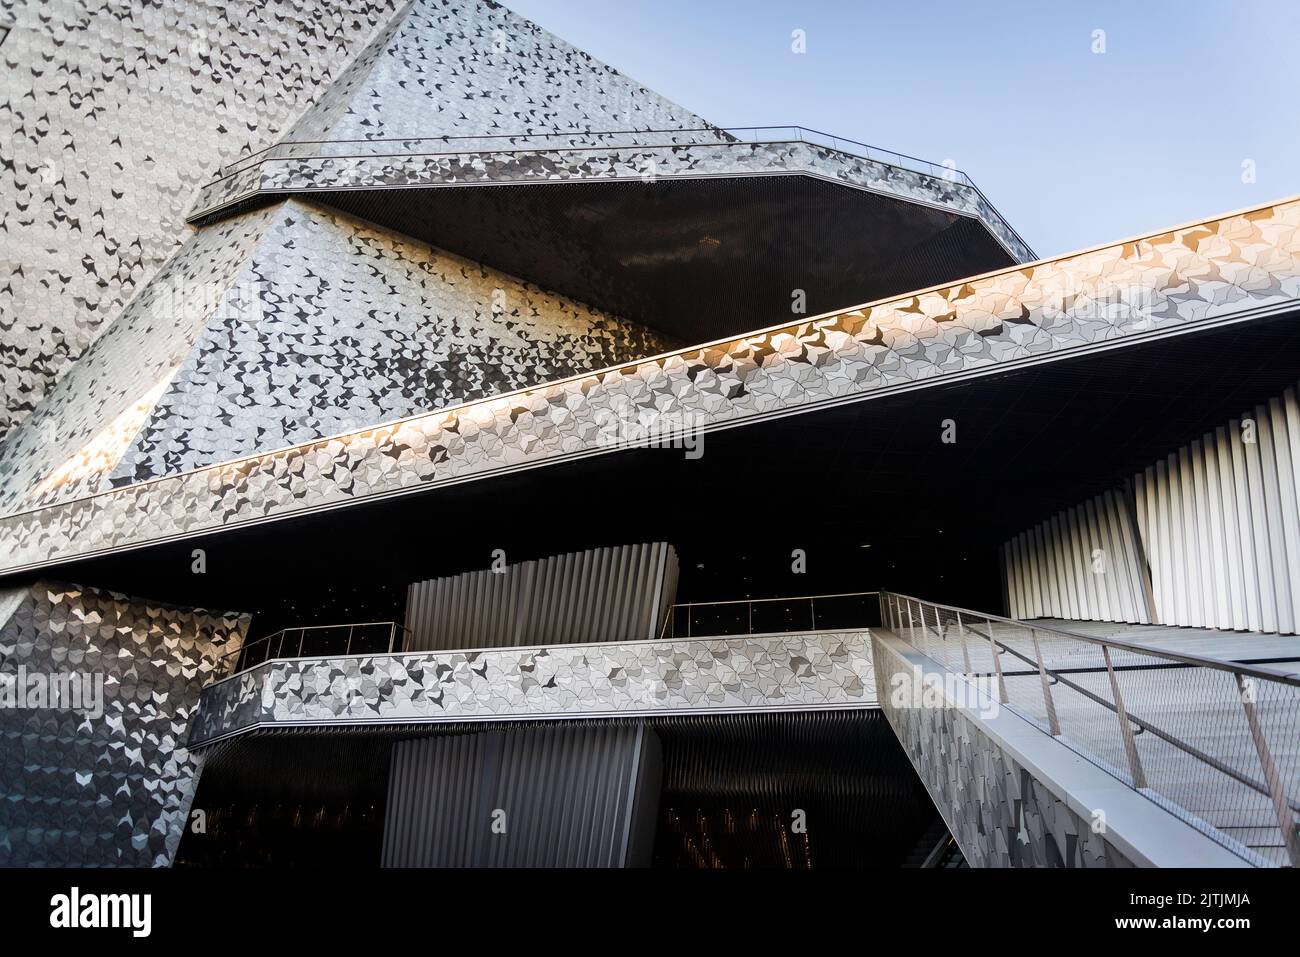 Philharmonie de Paris, a complex of concert halls featuring the symphonic concert hall of 2,400 seats designed by Jean Nouvel and opened in January 20 Stock Photo